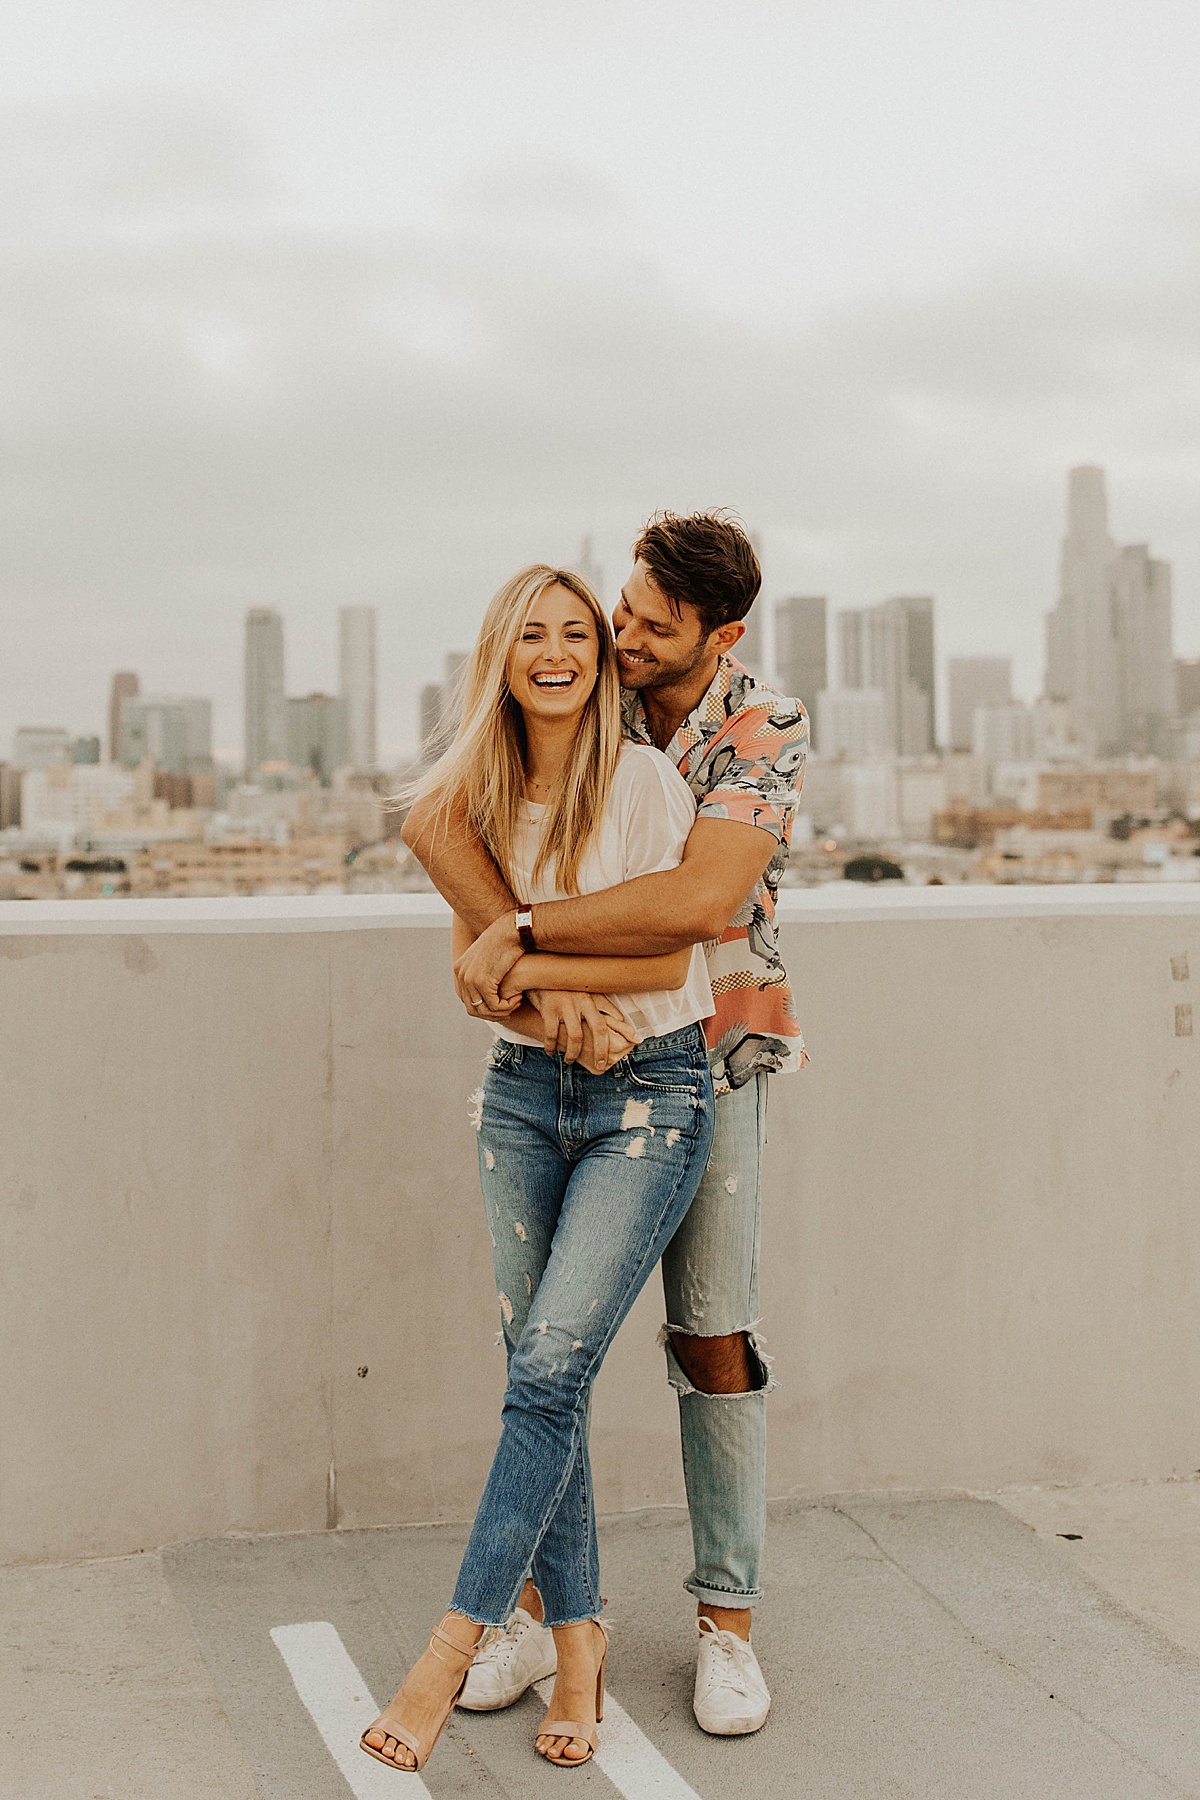 Fun and playful engagement photos in downtown LA.